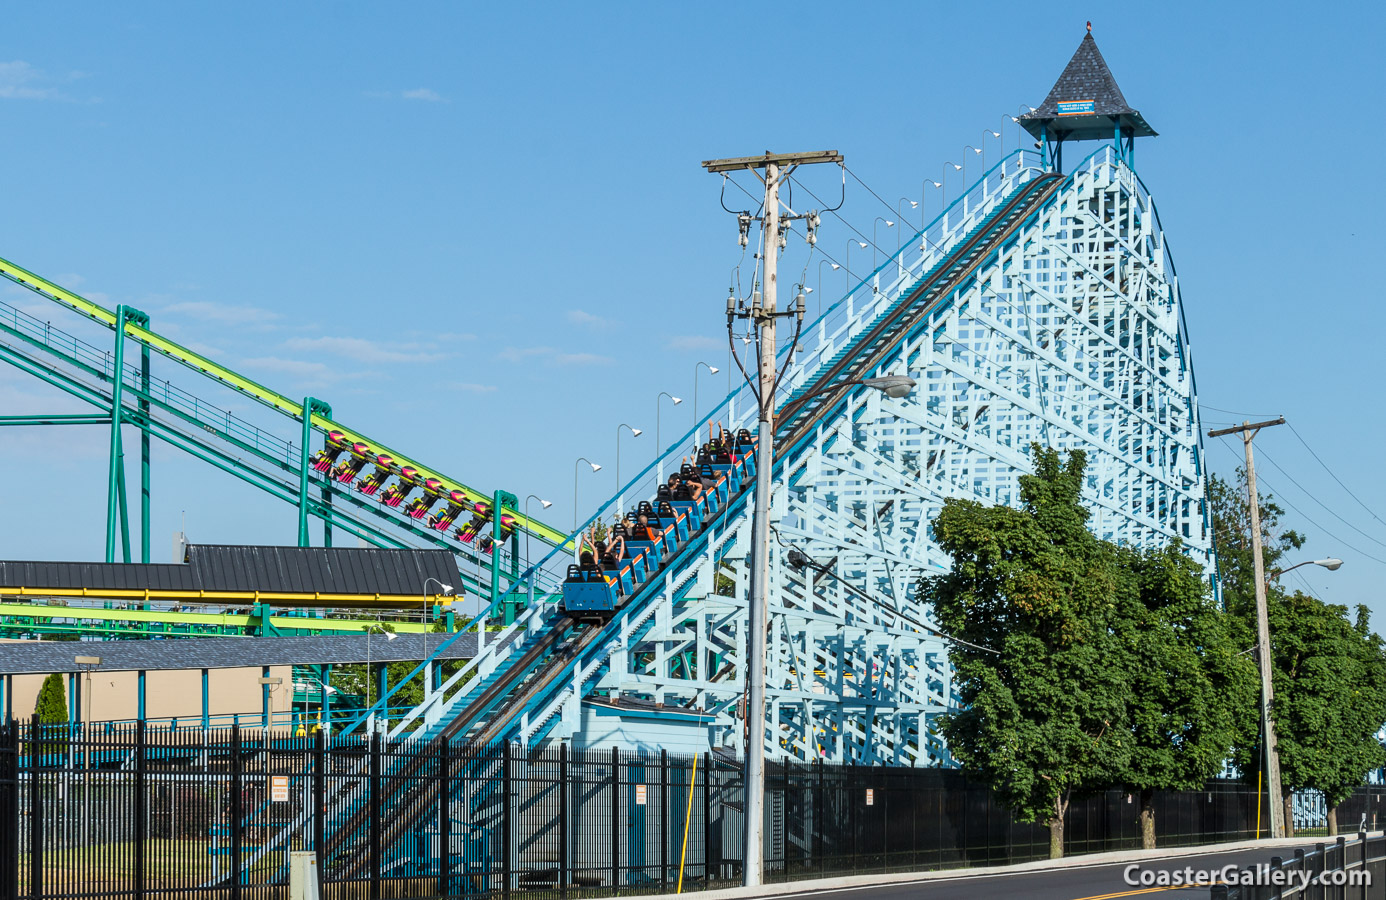 Picures of the Blue Streak coaster at Cedar Point